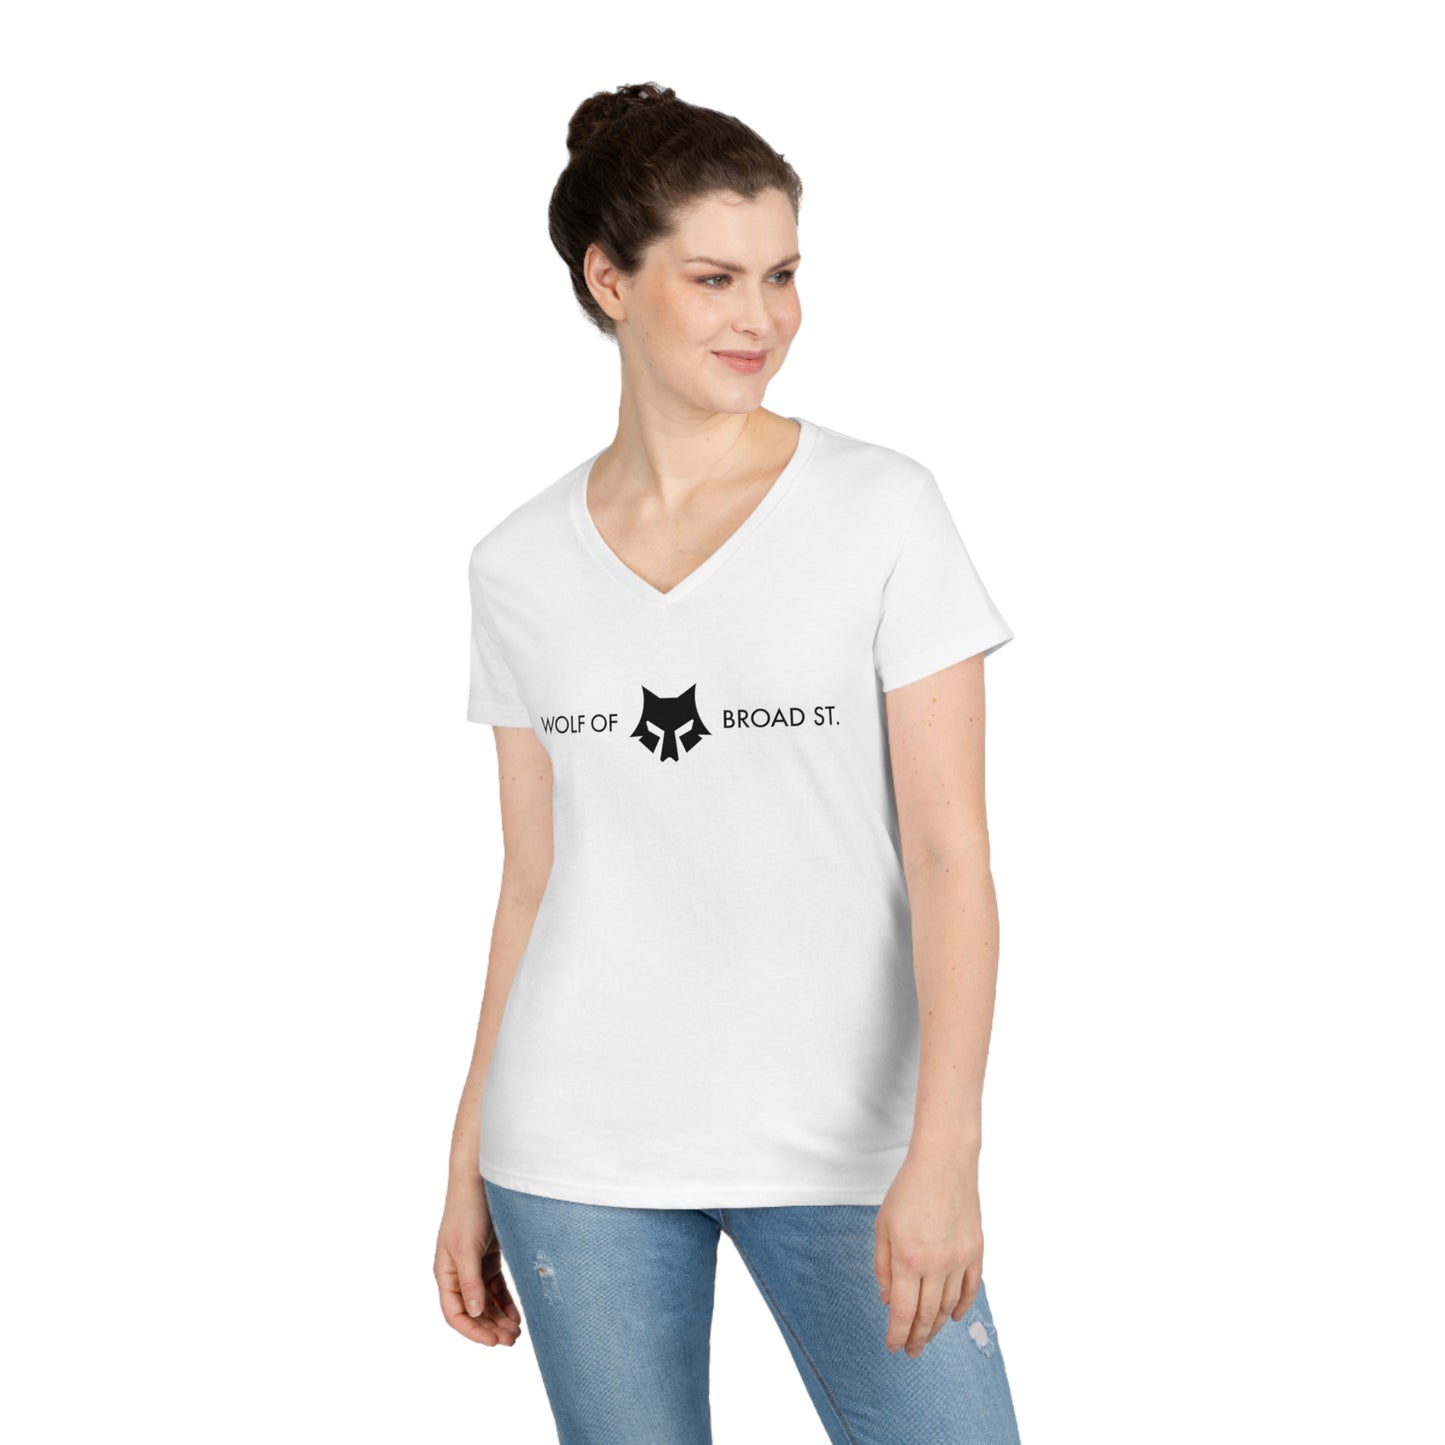 Women's Wolf of Broad Street "Power Moves Only" V-Neck White Tee